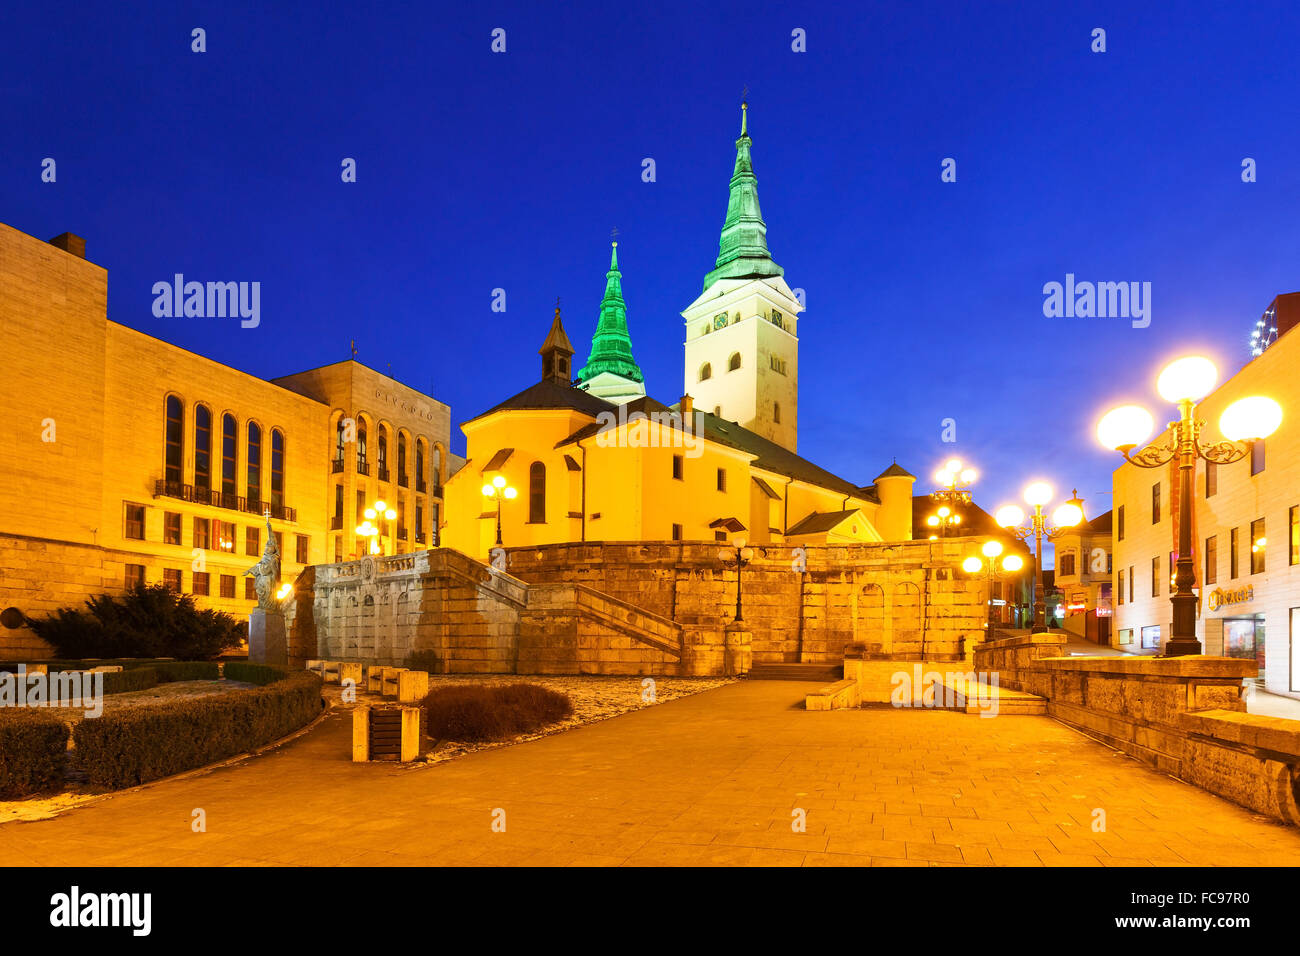 Square in the city of Zilina in central Slovakia. Stock Photo